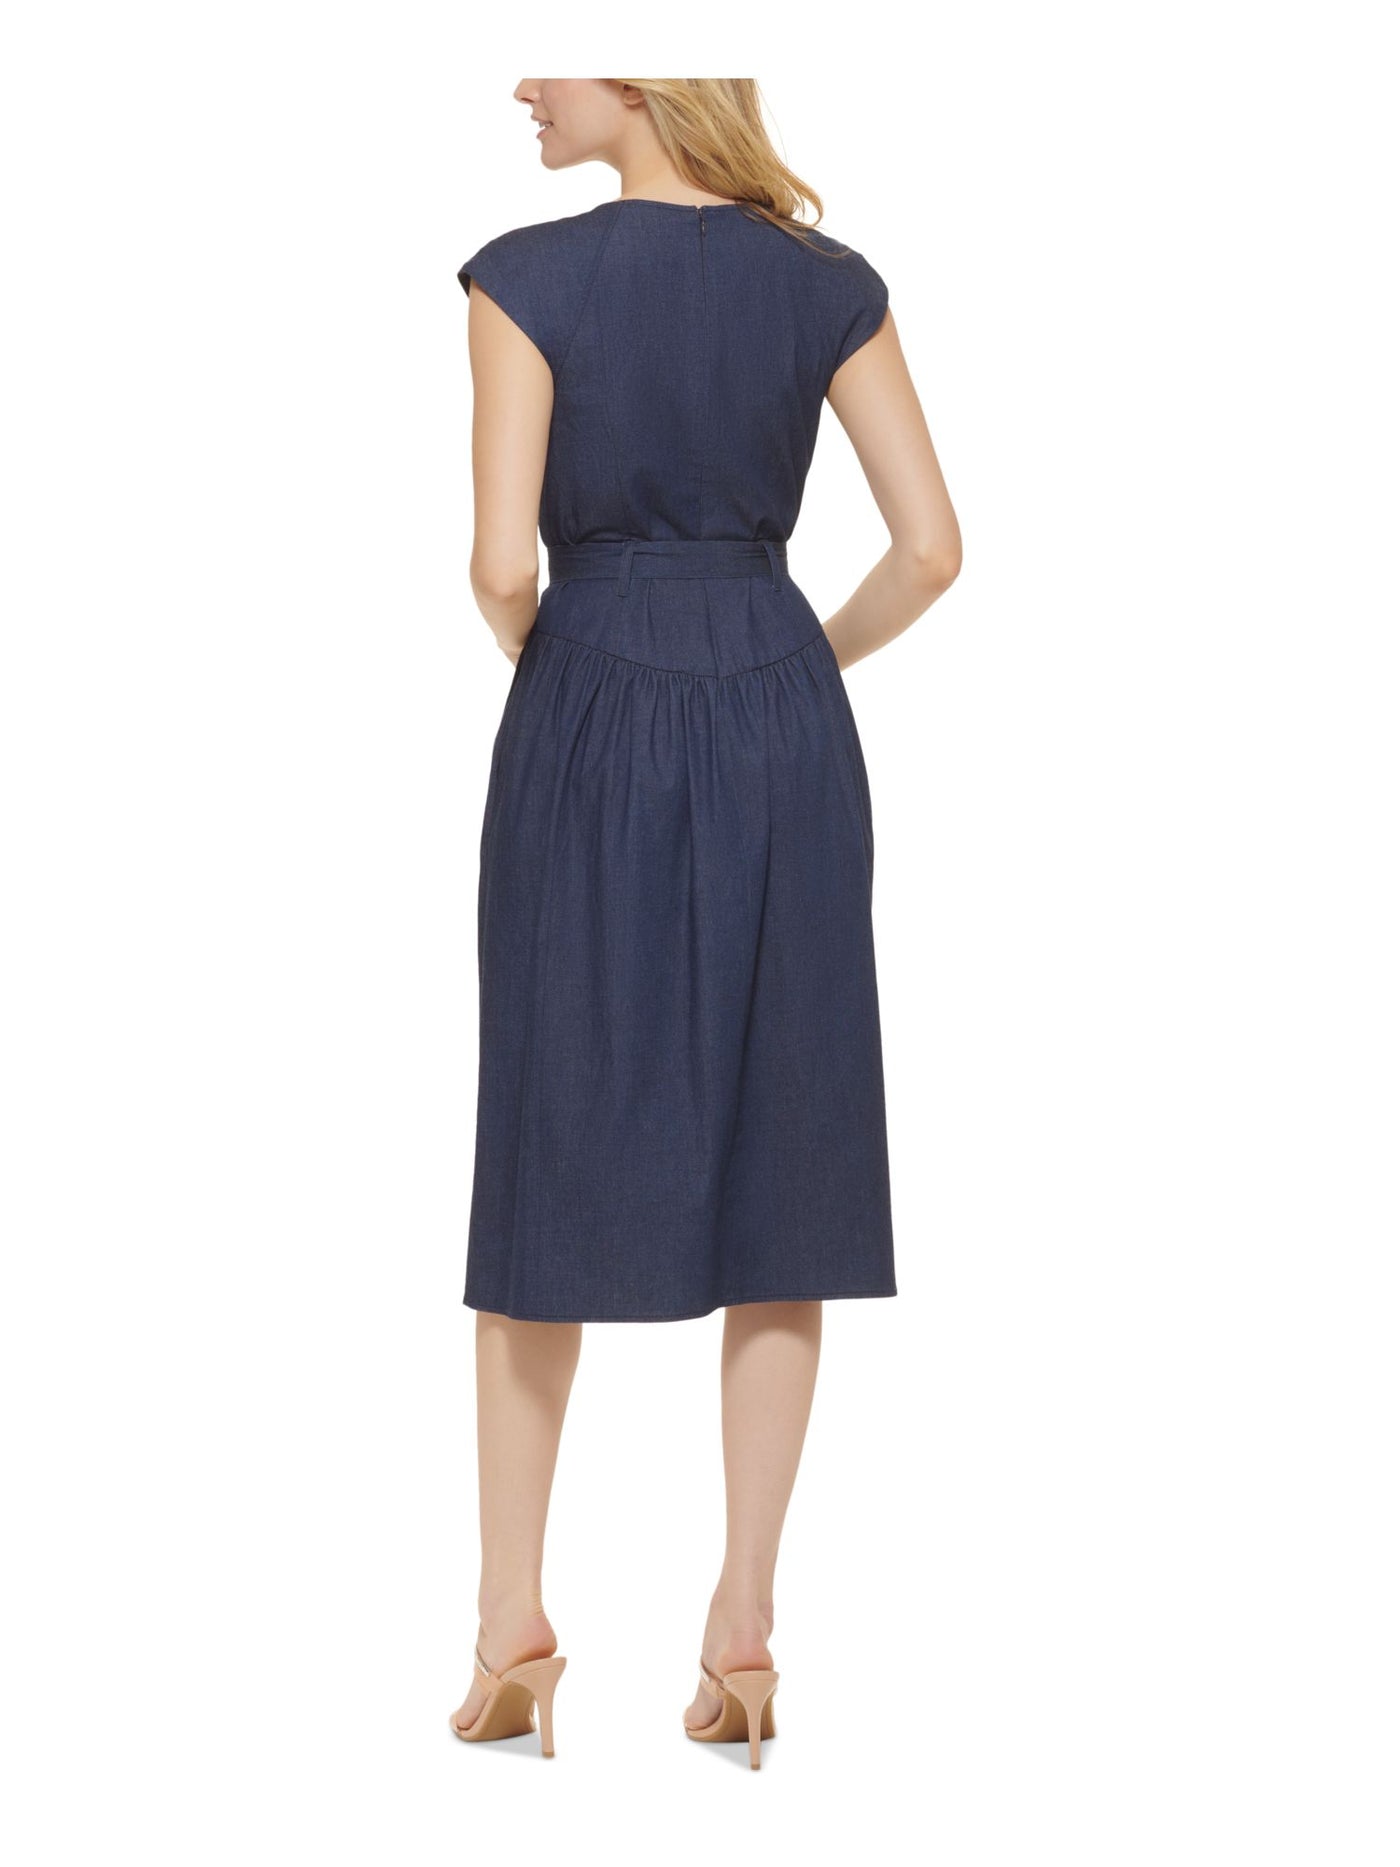 DKNY Womens Navy Zippered Pocketed Button Details Tie Belt Cap Sleeve V Neck Midi Wear To Work Fit + Flare Dress 4